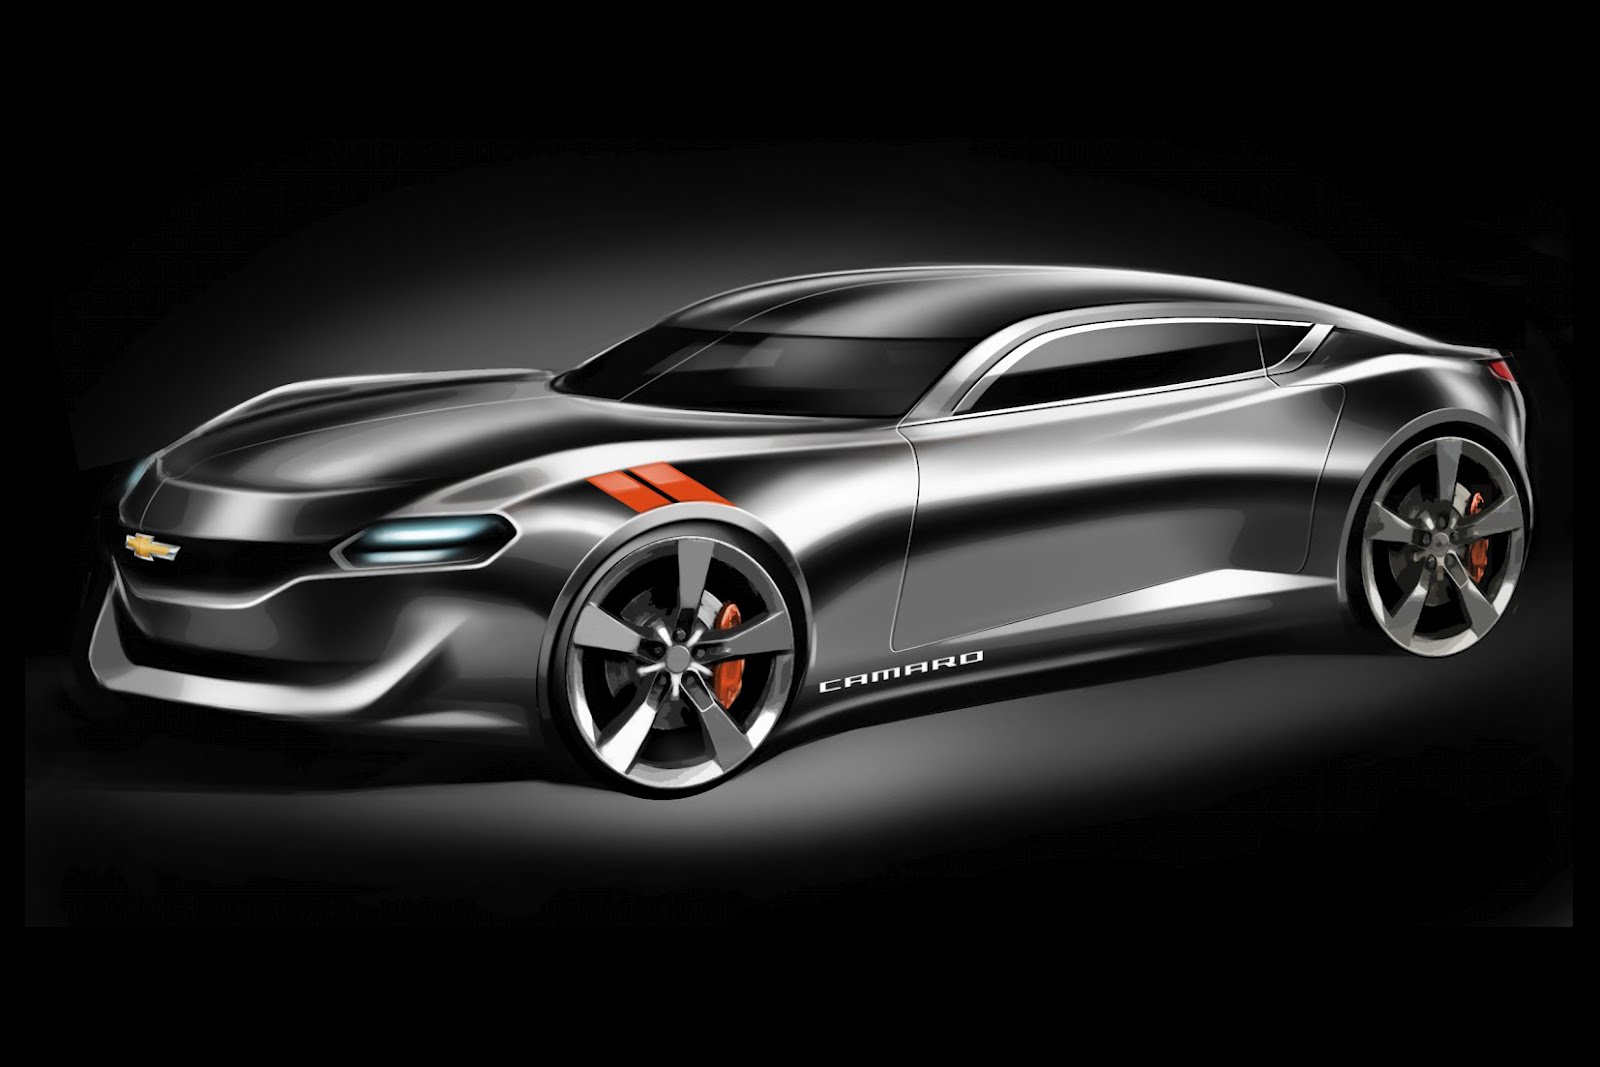 2015 Chevrolet Camaro Coupe Design Study: What do Think? | Carscoops